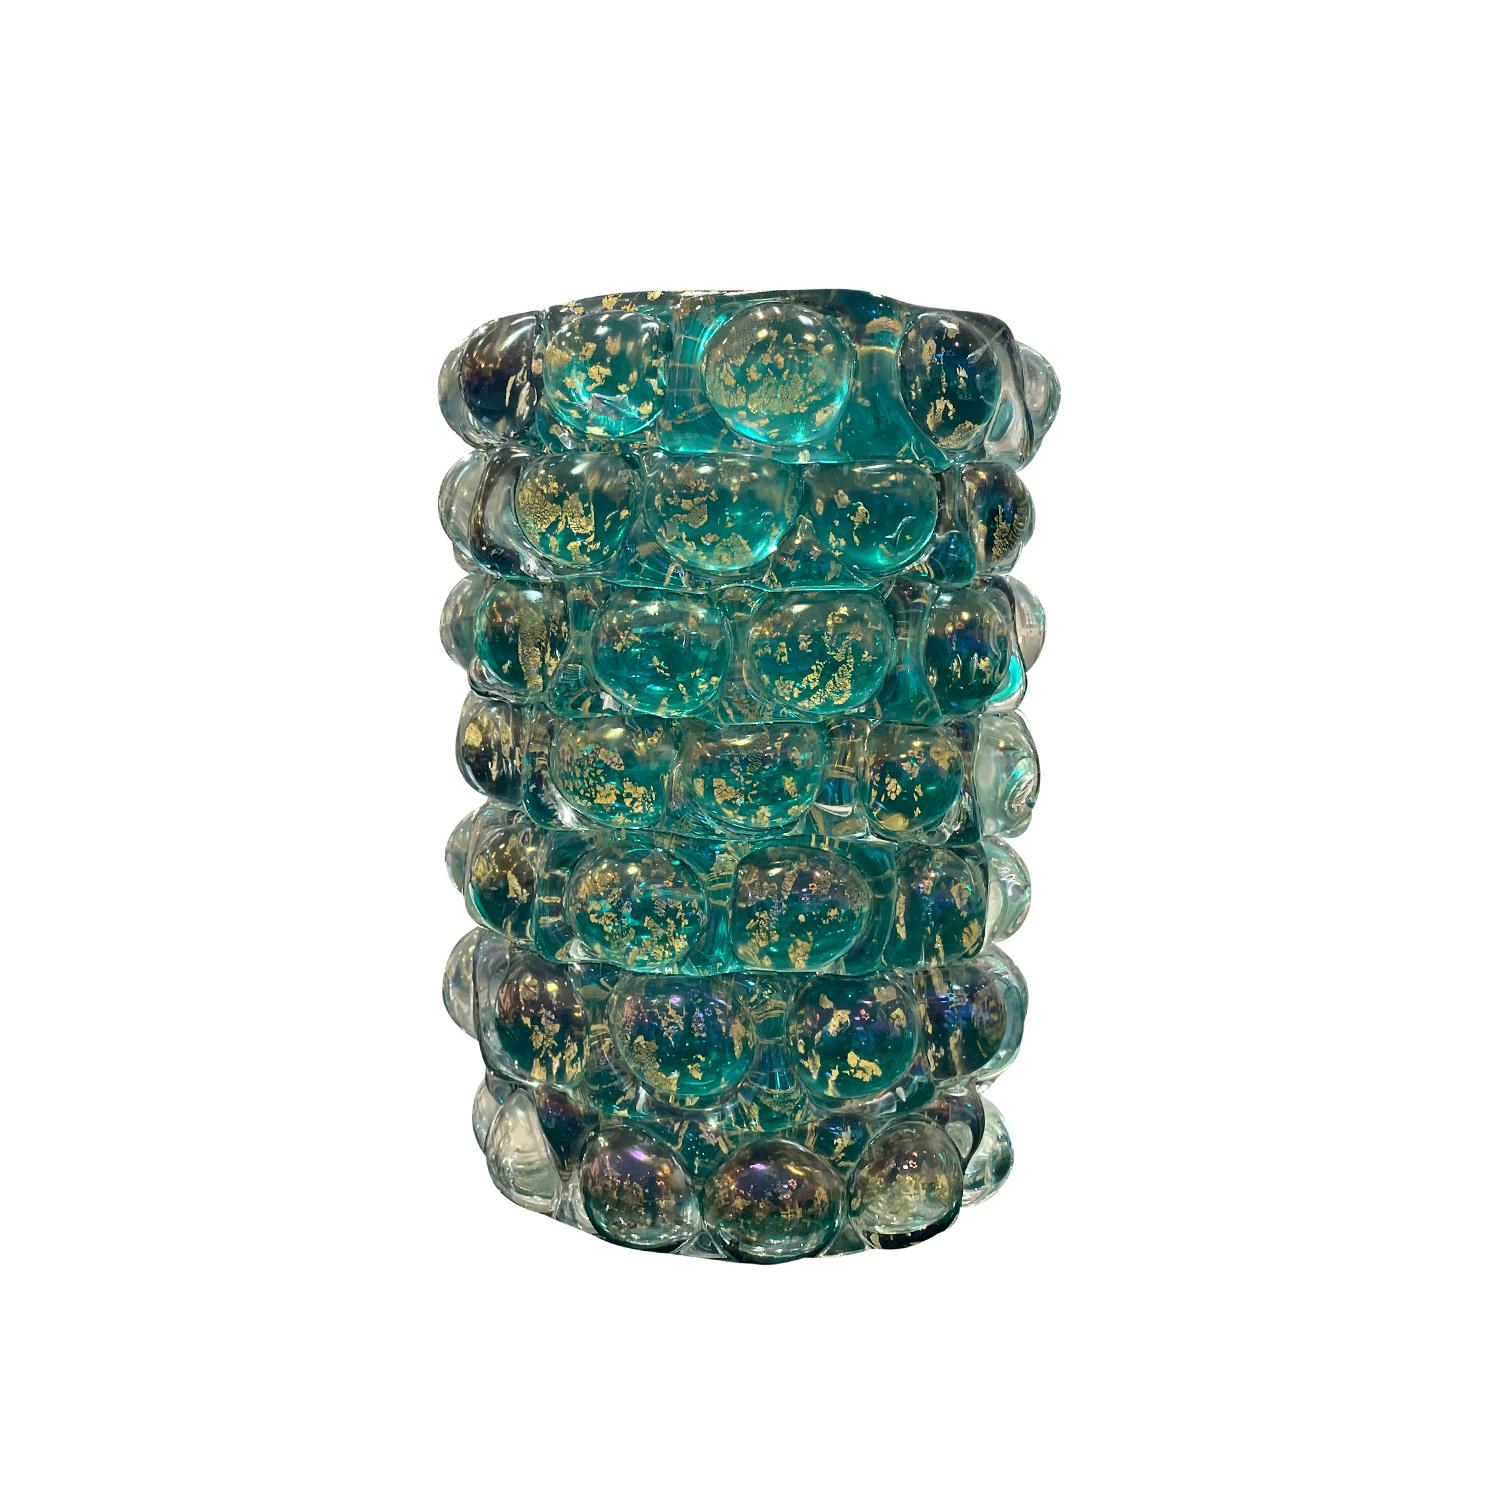 A light-green, vintage Mid-Century modern Italian single vase made of hand blown slightly smoked, colored Murano glass, designed by Ercole Barovier and produced by Barovier & Toso, in good condition. The cylindrical shaped décor piece is from the